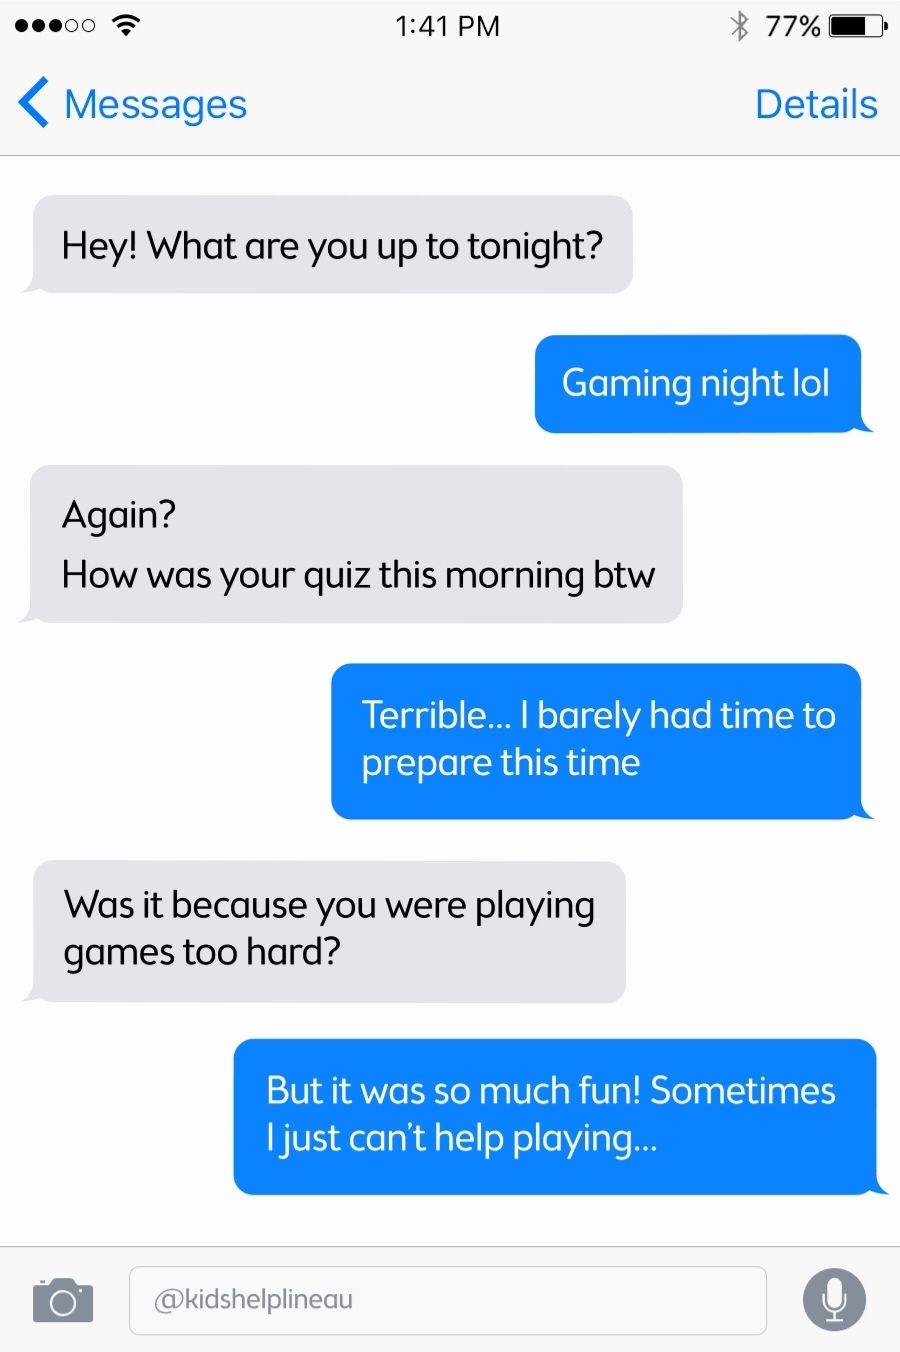 Two teens texting on a mobile, having a conversation about gaming addiction